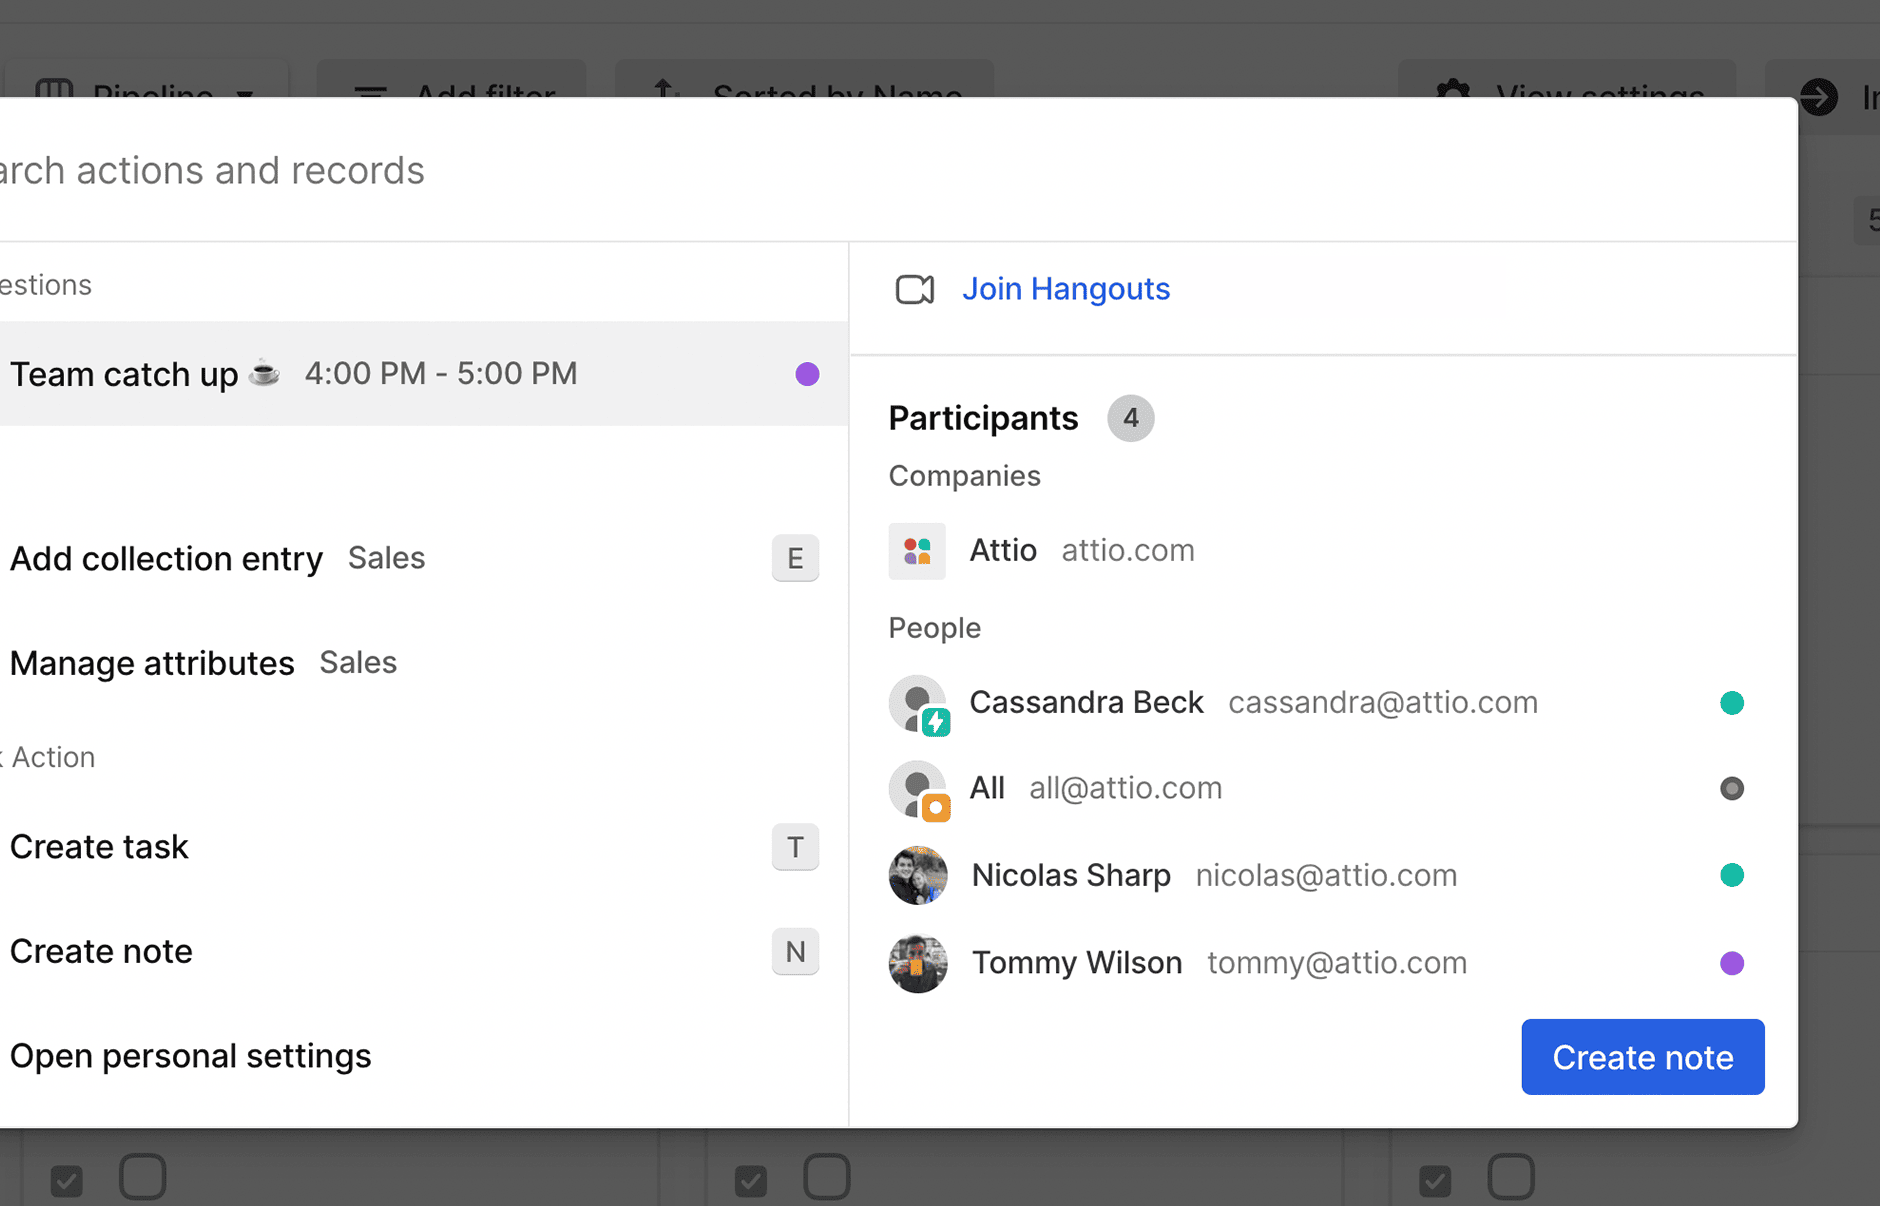 Close-up of the quick action window that appears when cmd + k is pressed anywhere in Attio. A sumamry of upcoming calendar events is shown, including attendees, your editable RSVP response, a link to the video call, and notes.